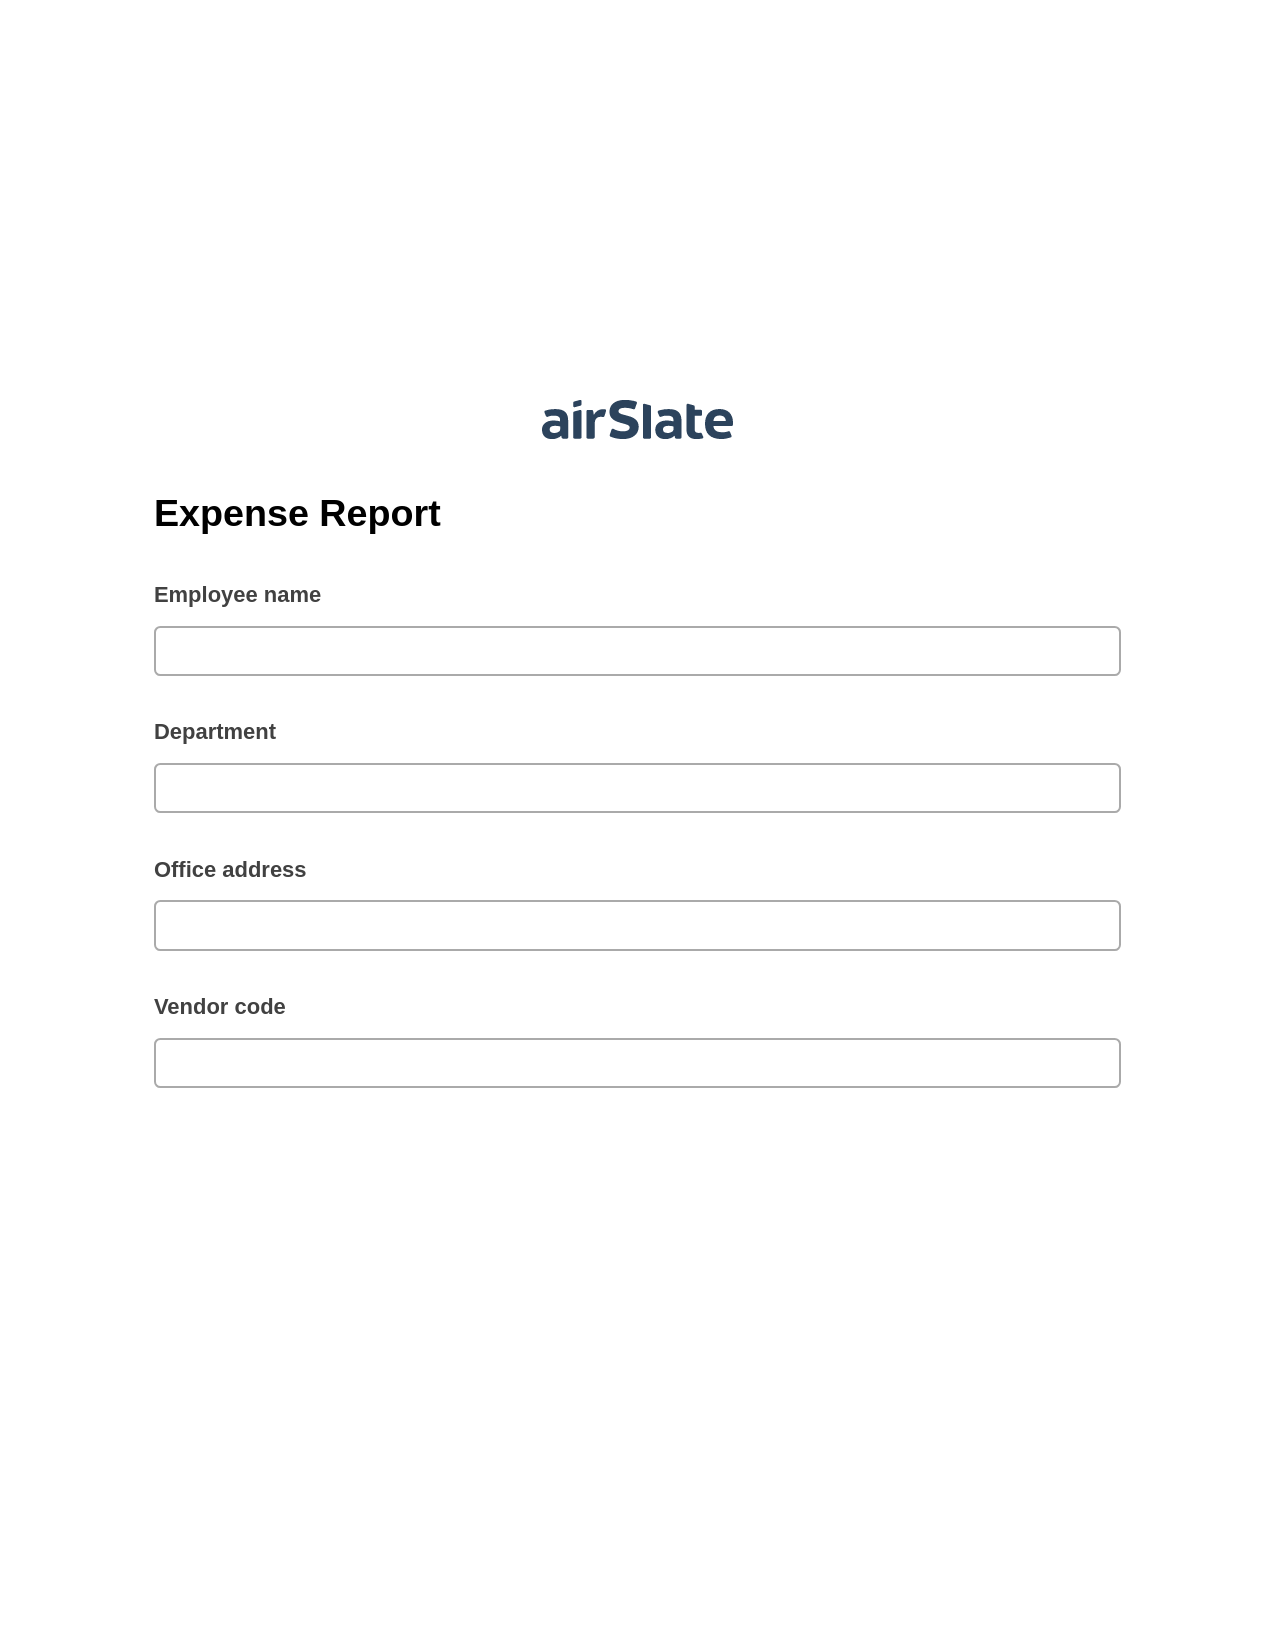 Expense Report Pre-fill from Salesforce Records with SOQL Bot, Create slate addon, Export to Smartsheet